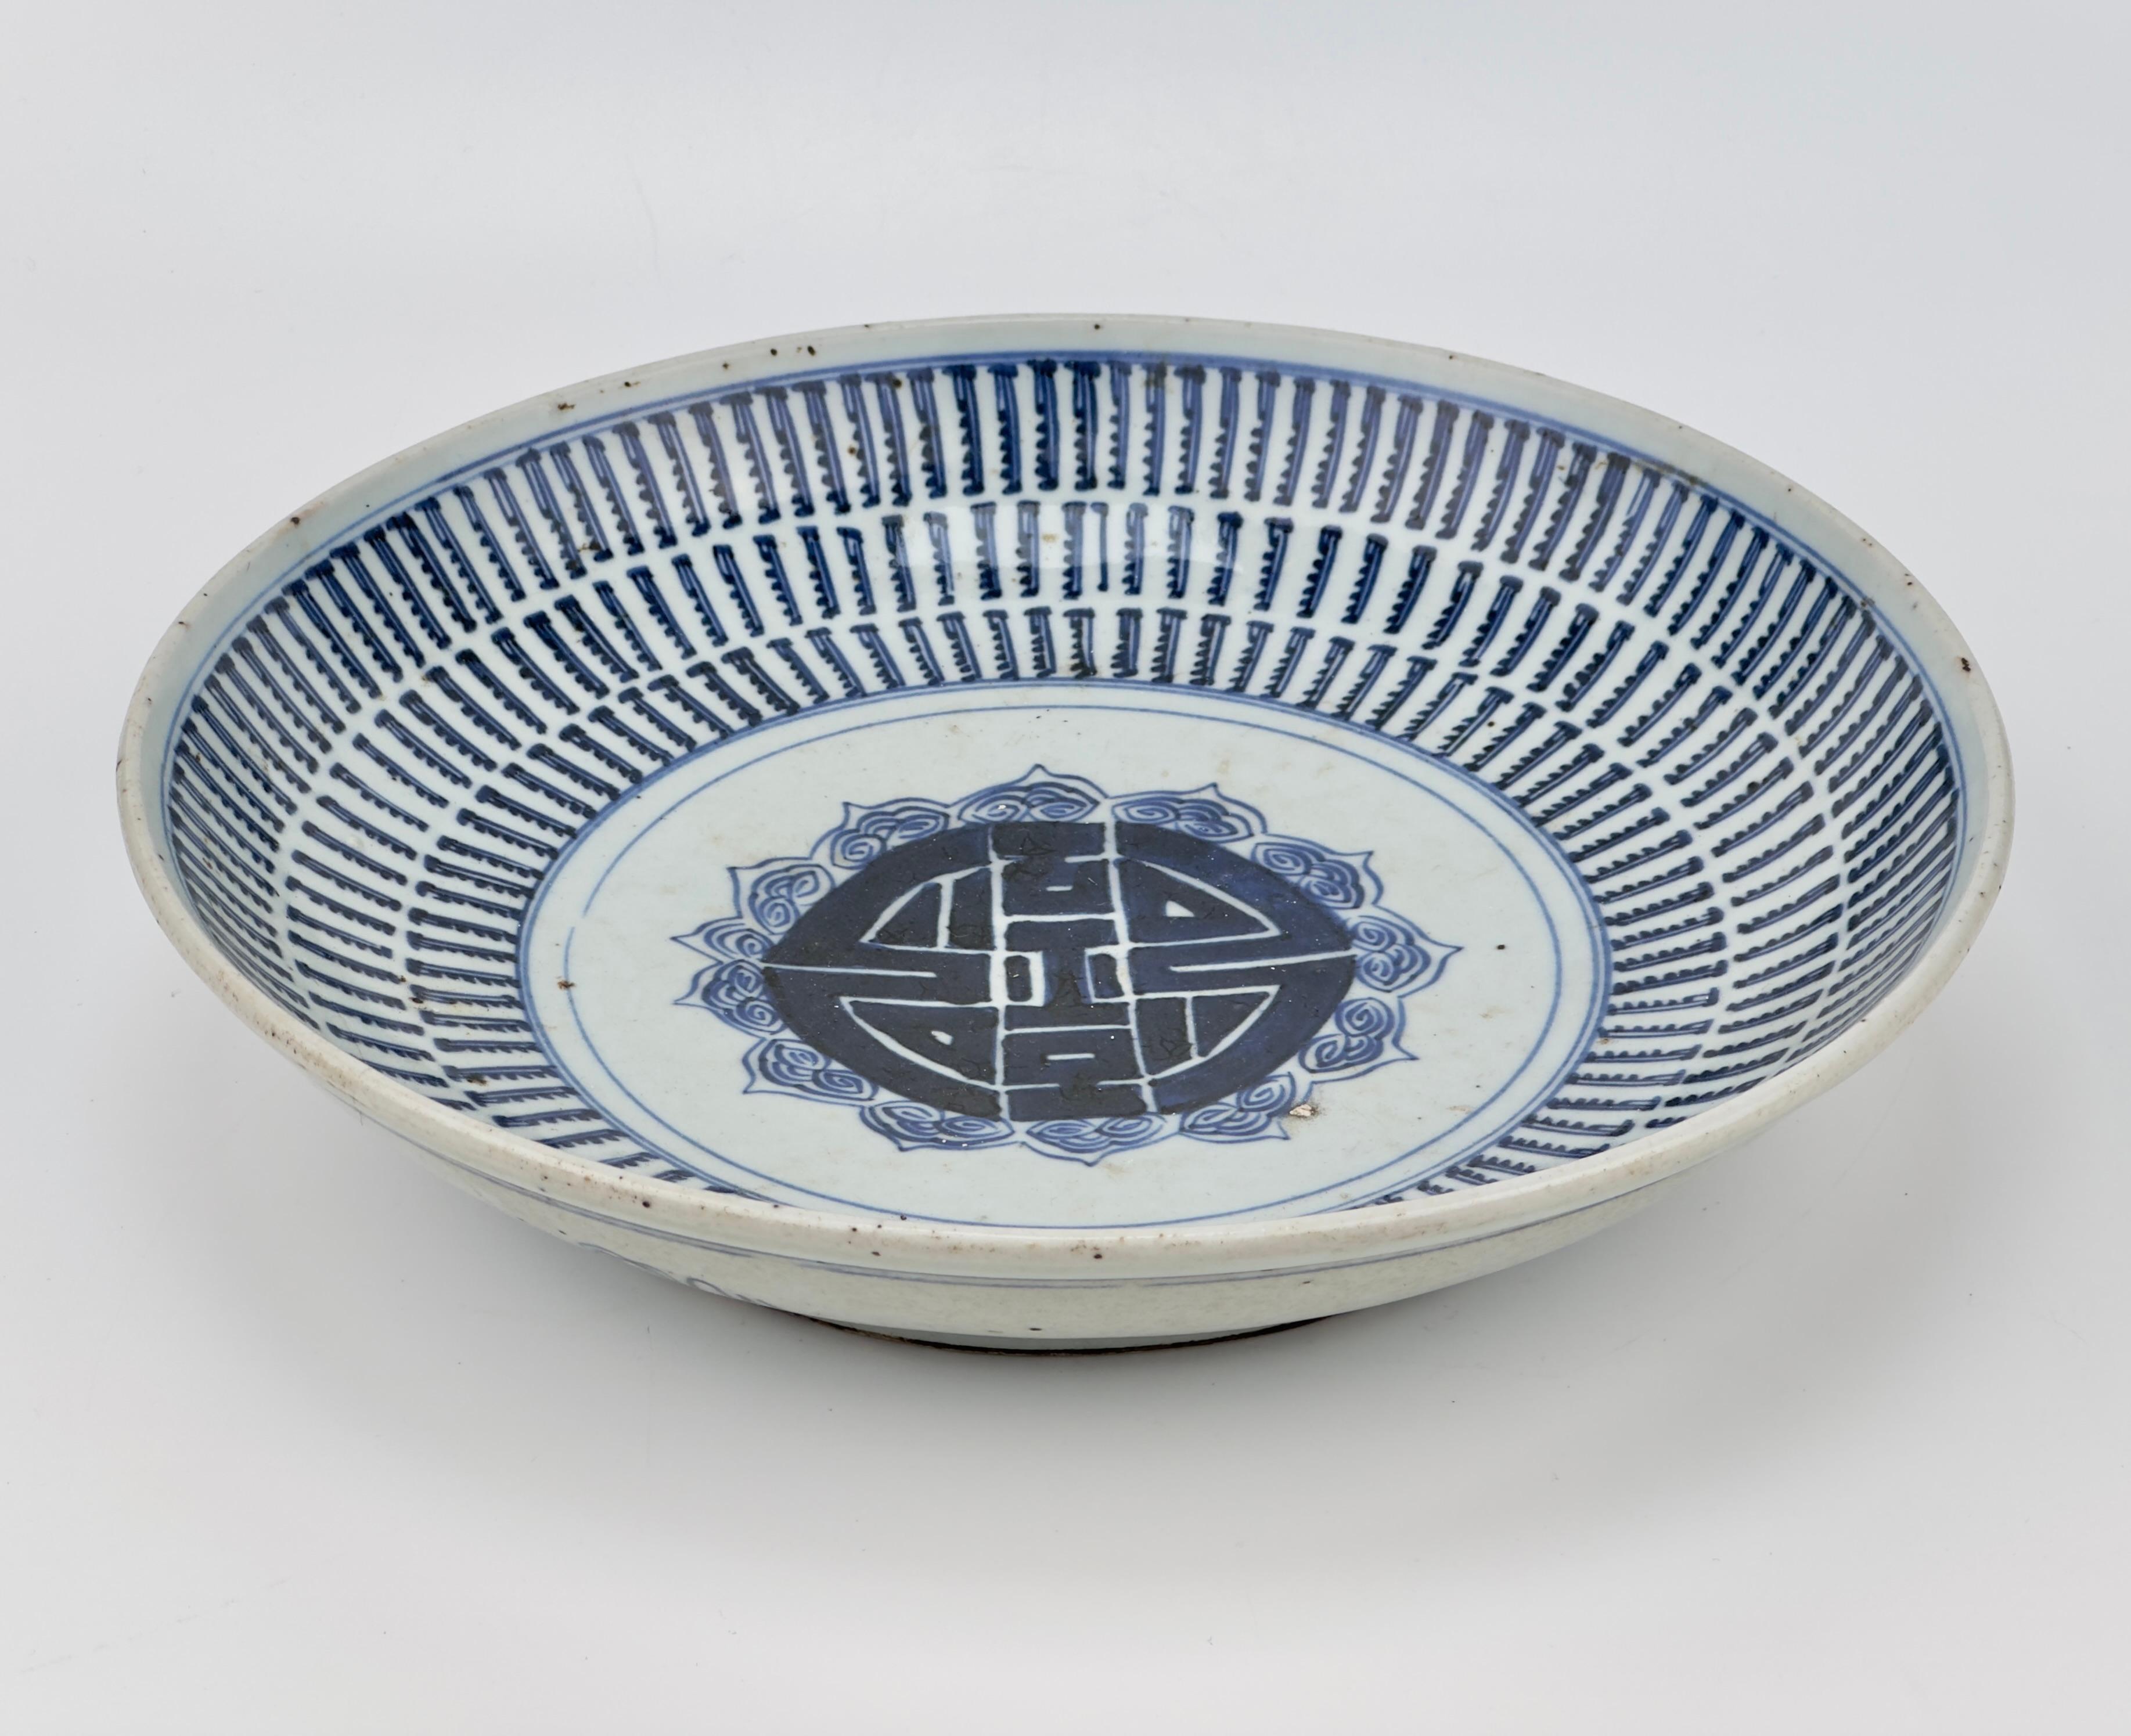 Chinese Blue and White Porcelain Longevity Dish, Qing Period (18-19th century) For Sale 6